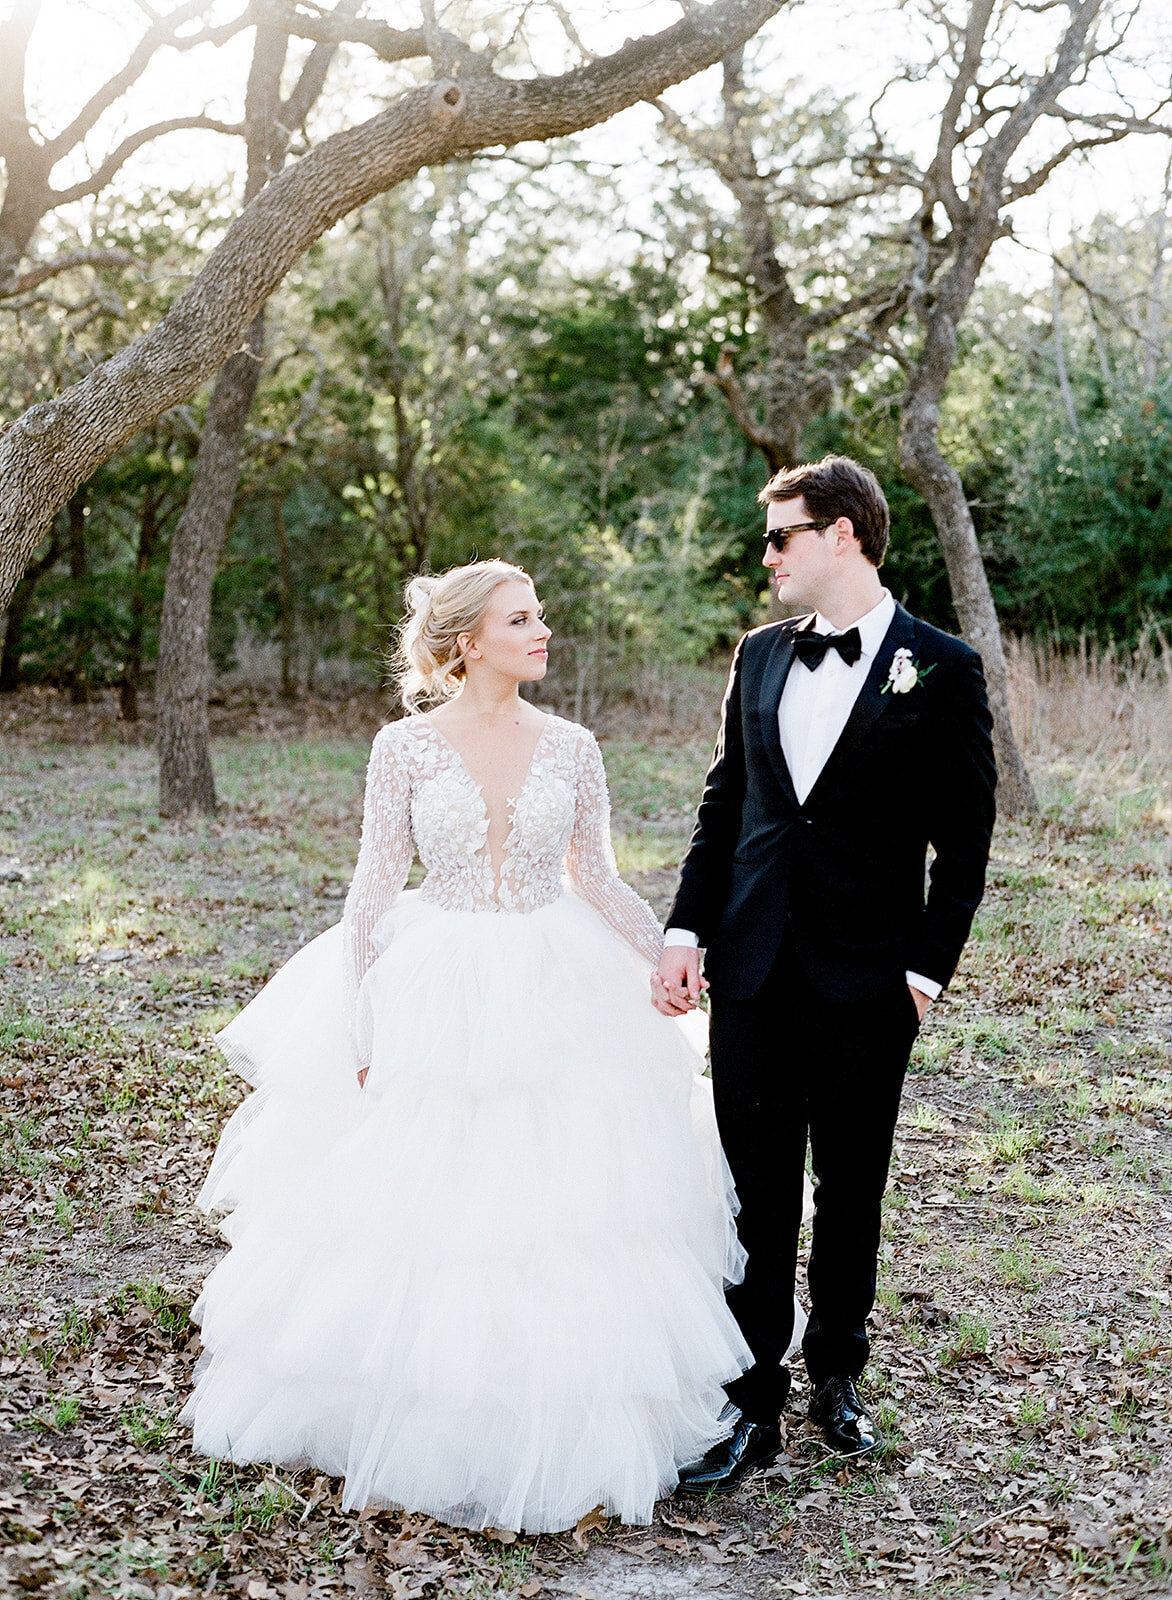 Texas Styled Shoot at the Grand Lady Austin Texas 66